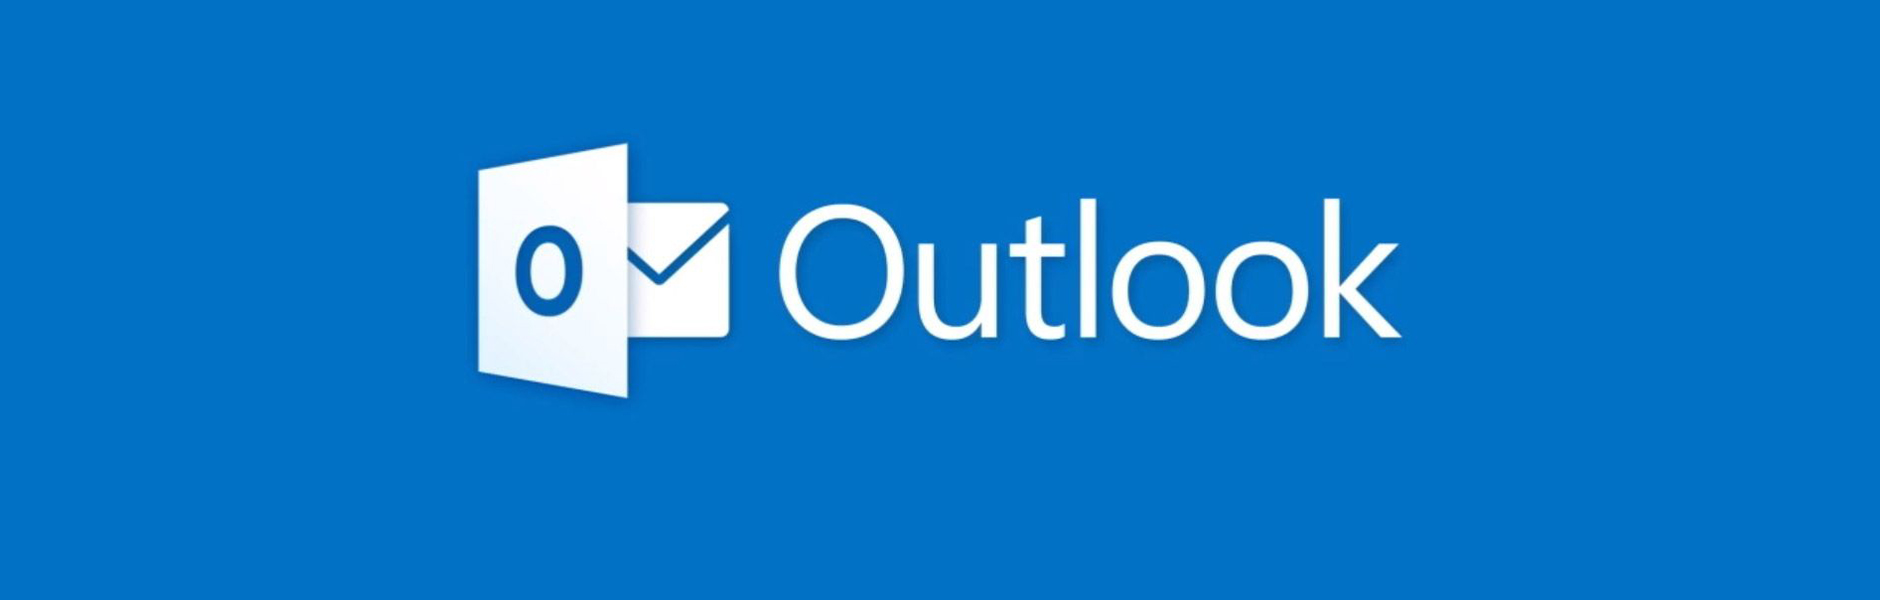 What is Outlook?